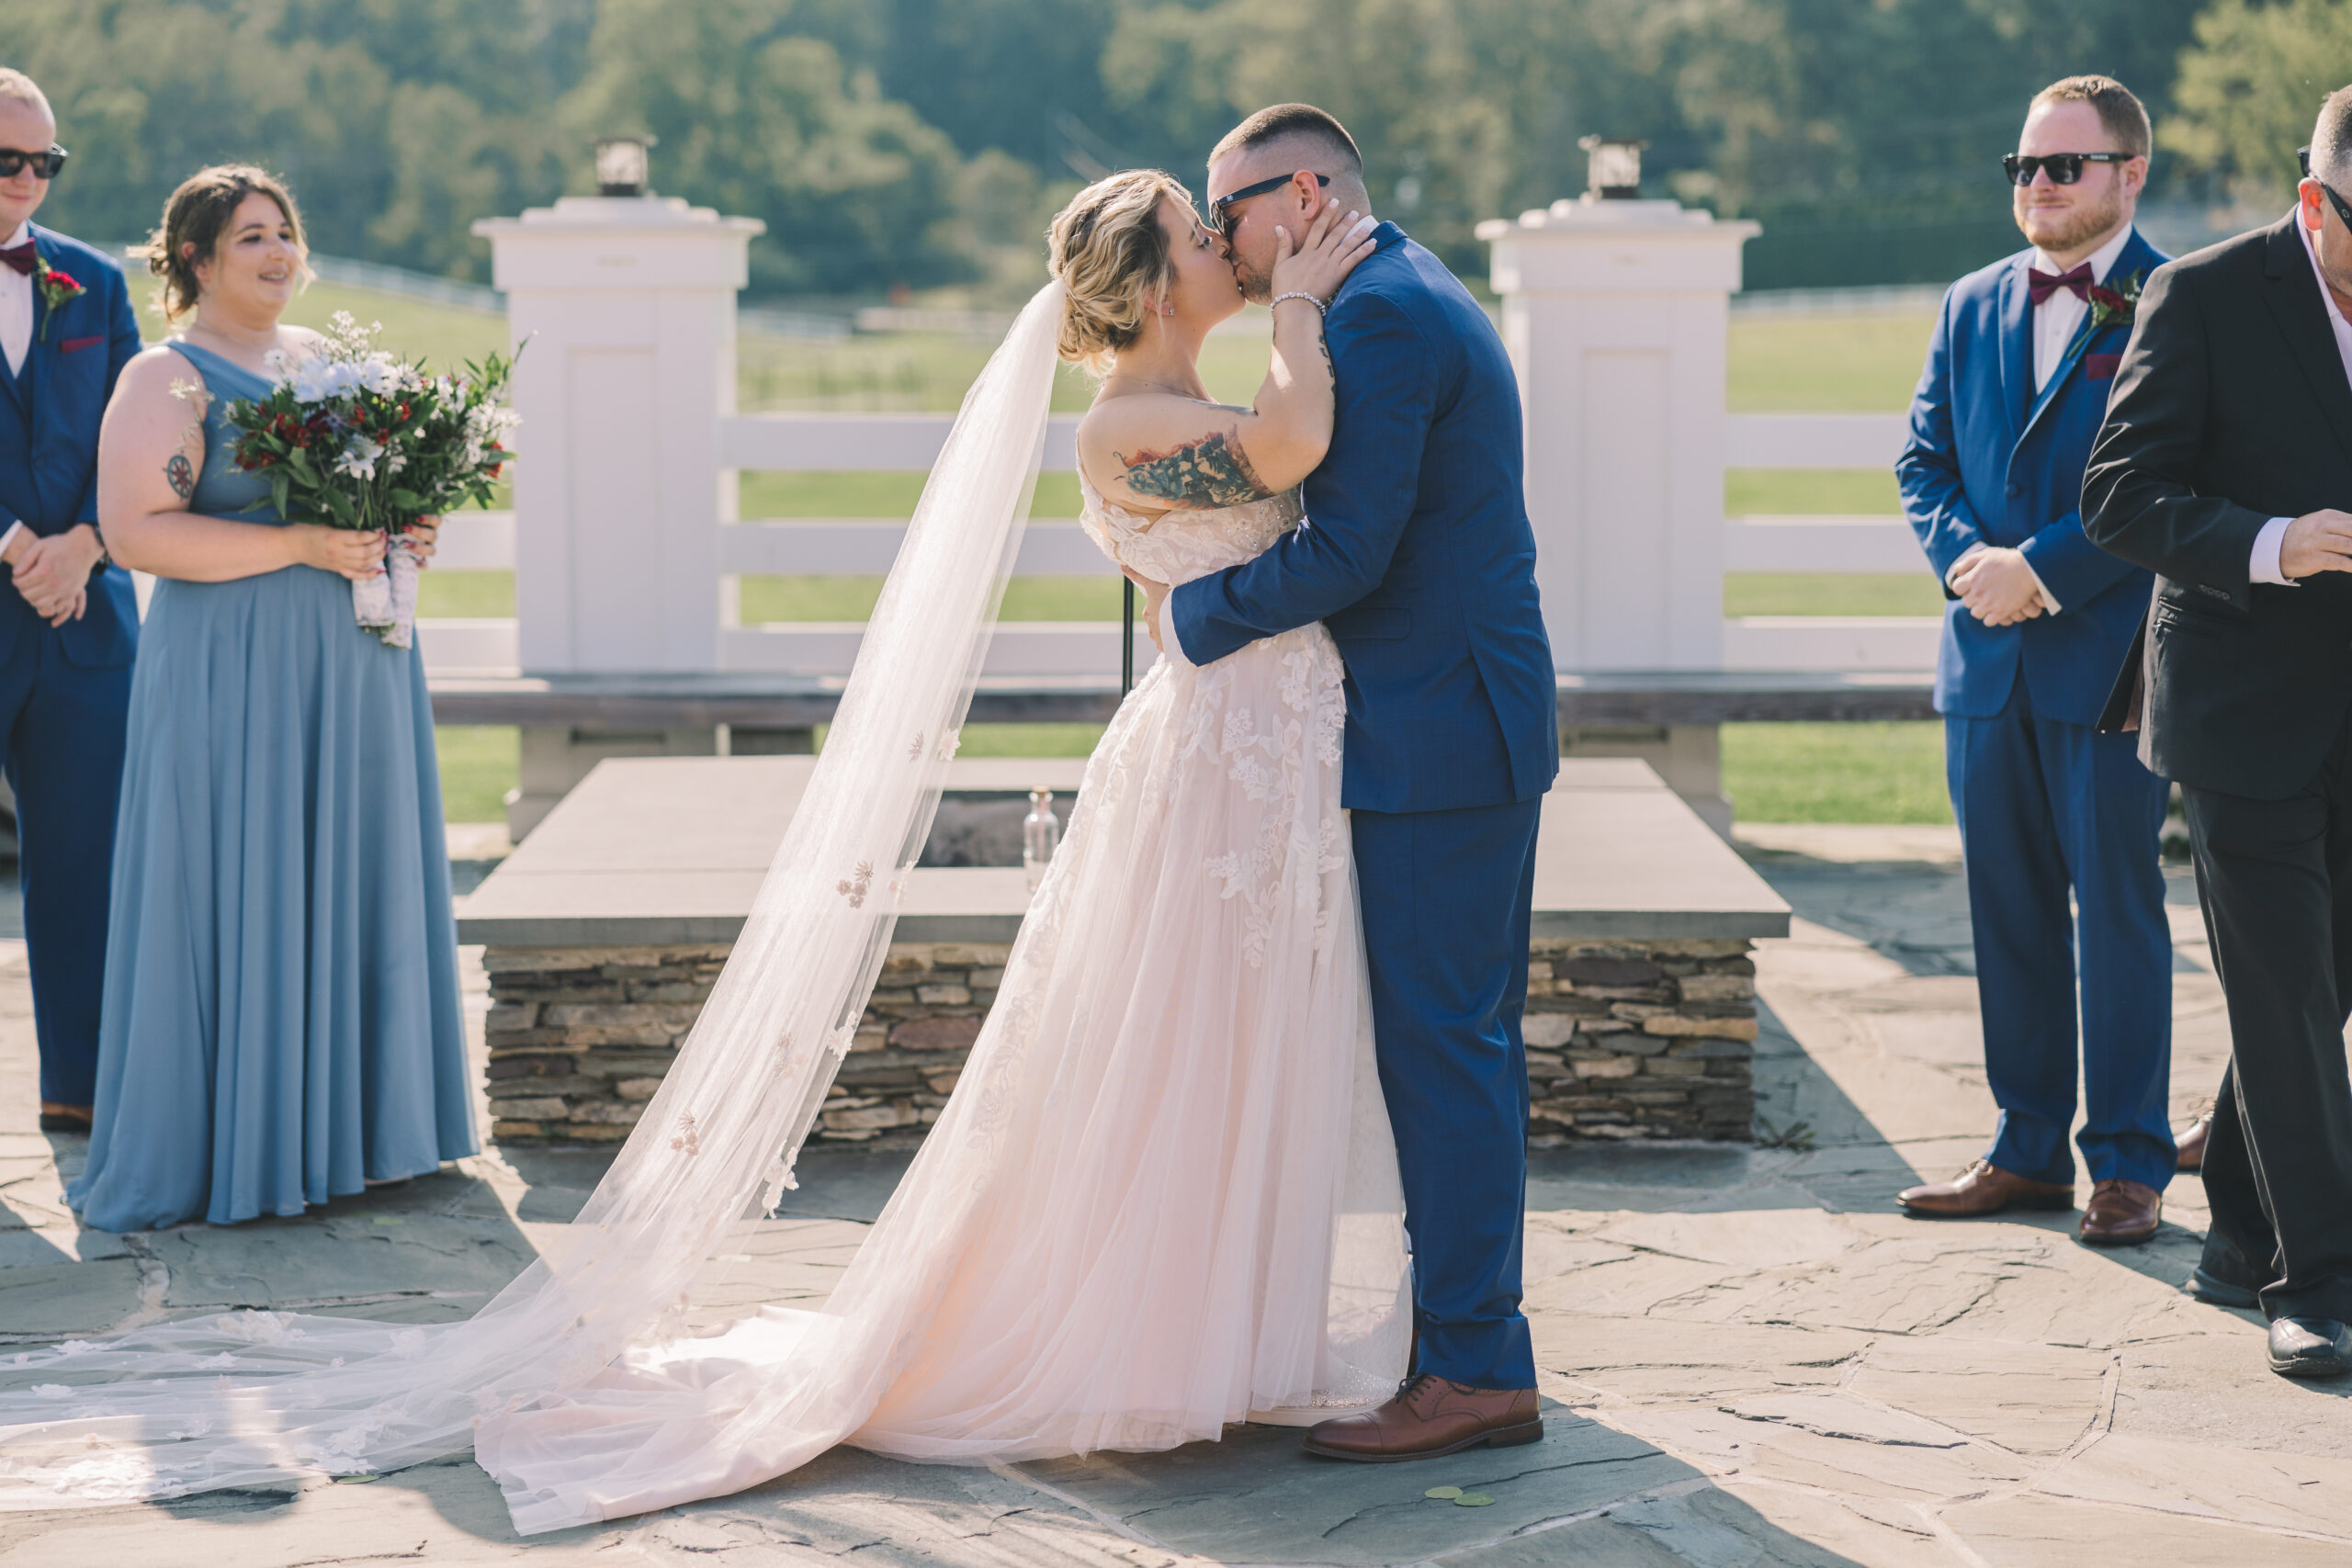 Bride and Groom Share first kiss at their Friedman Farms wedding